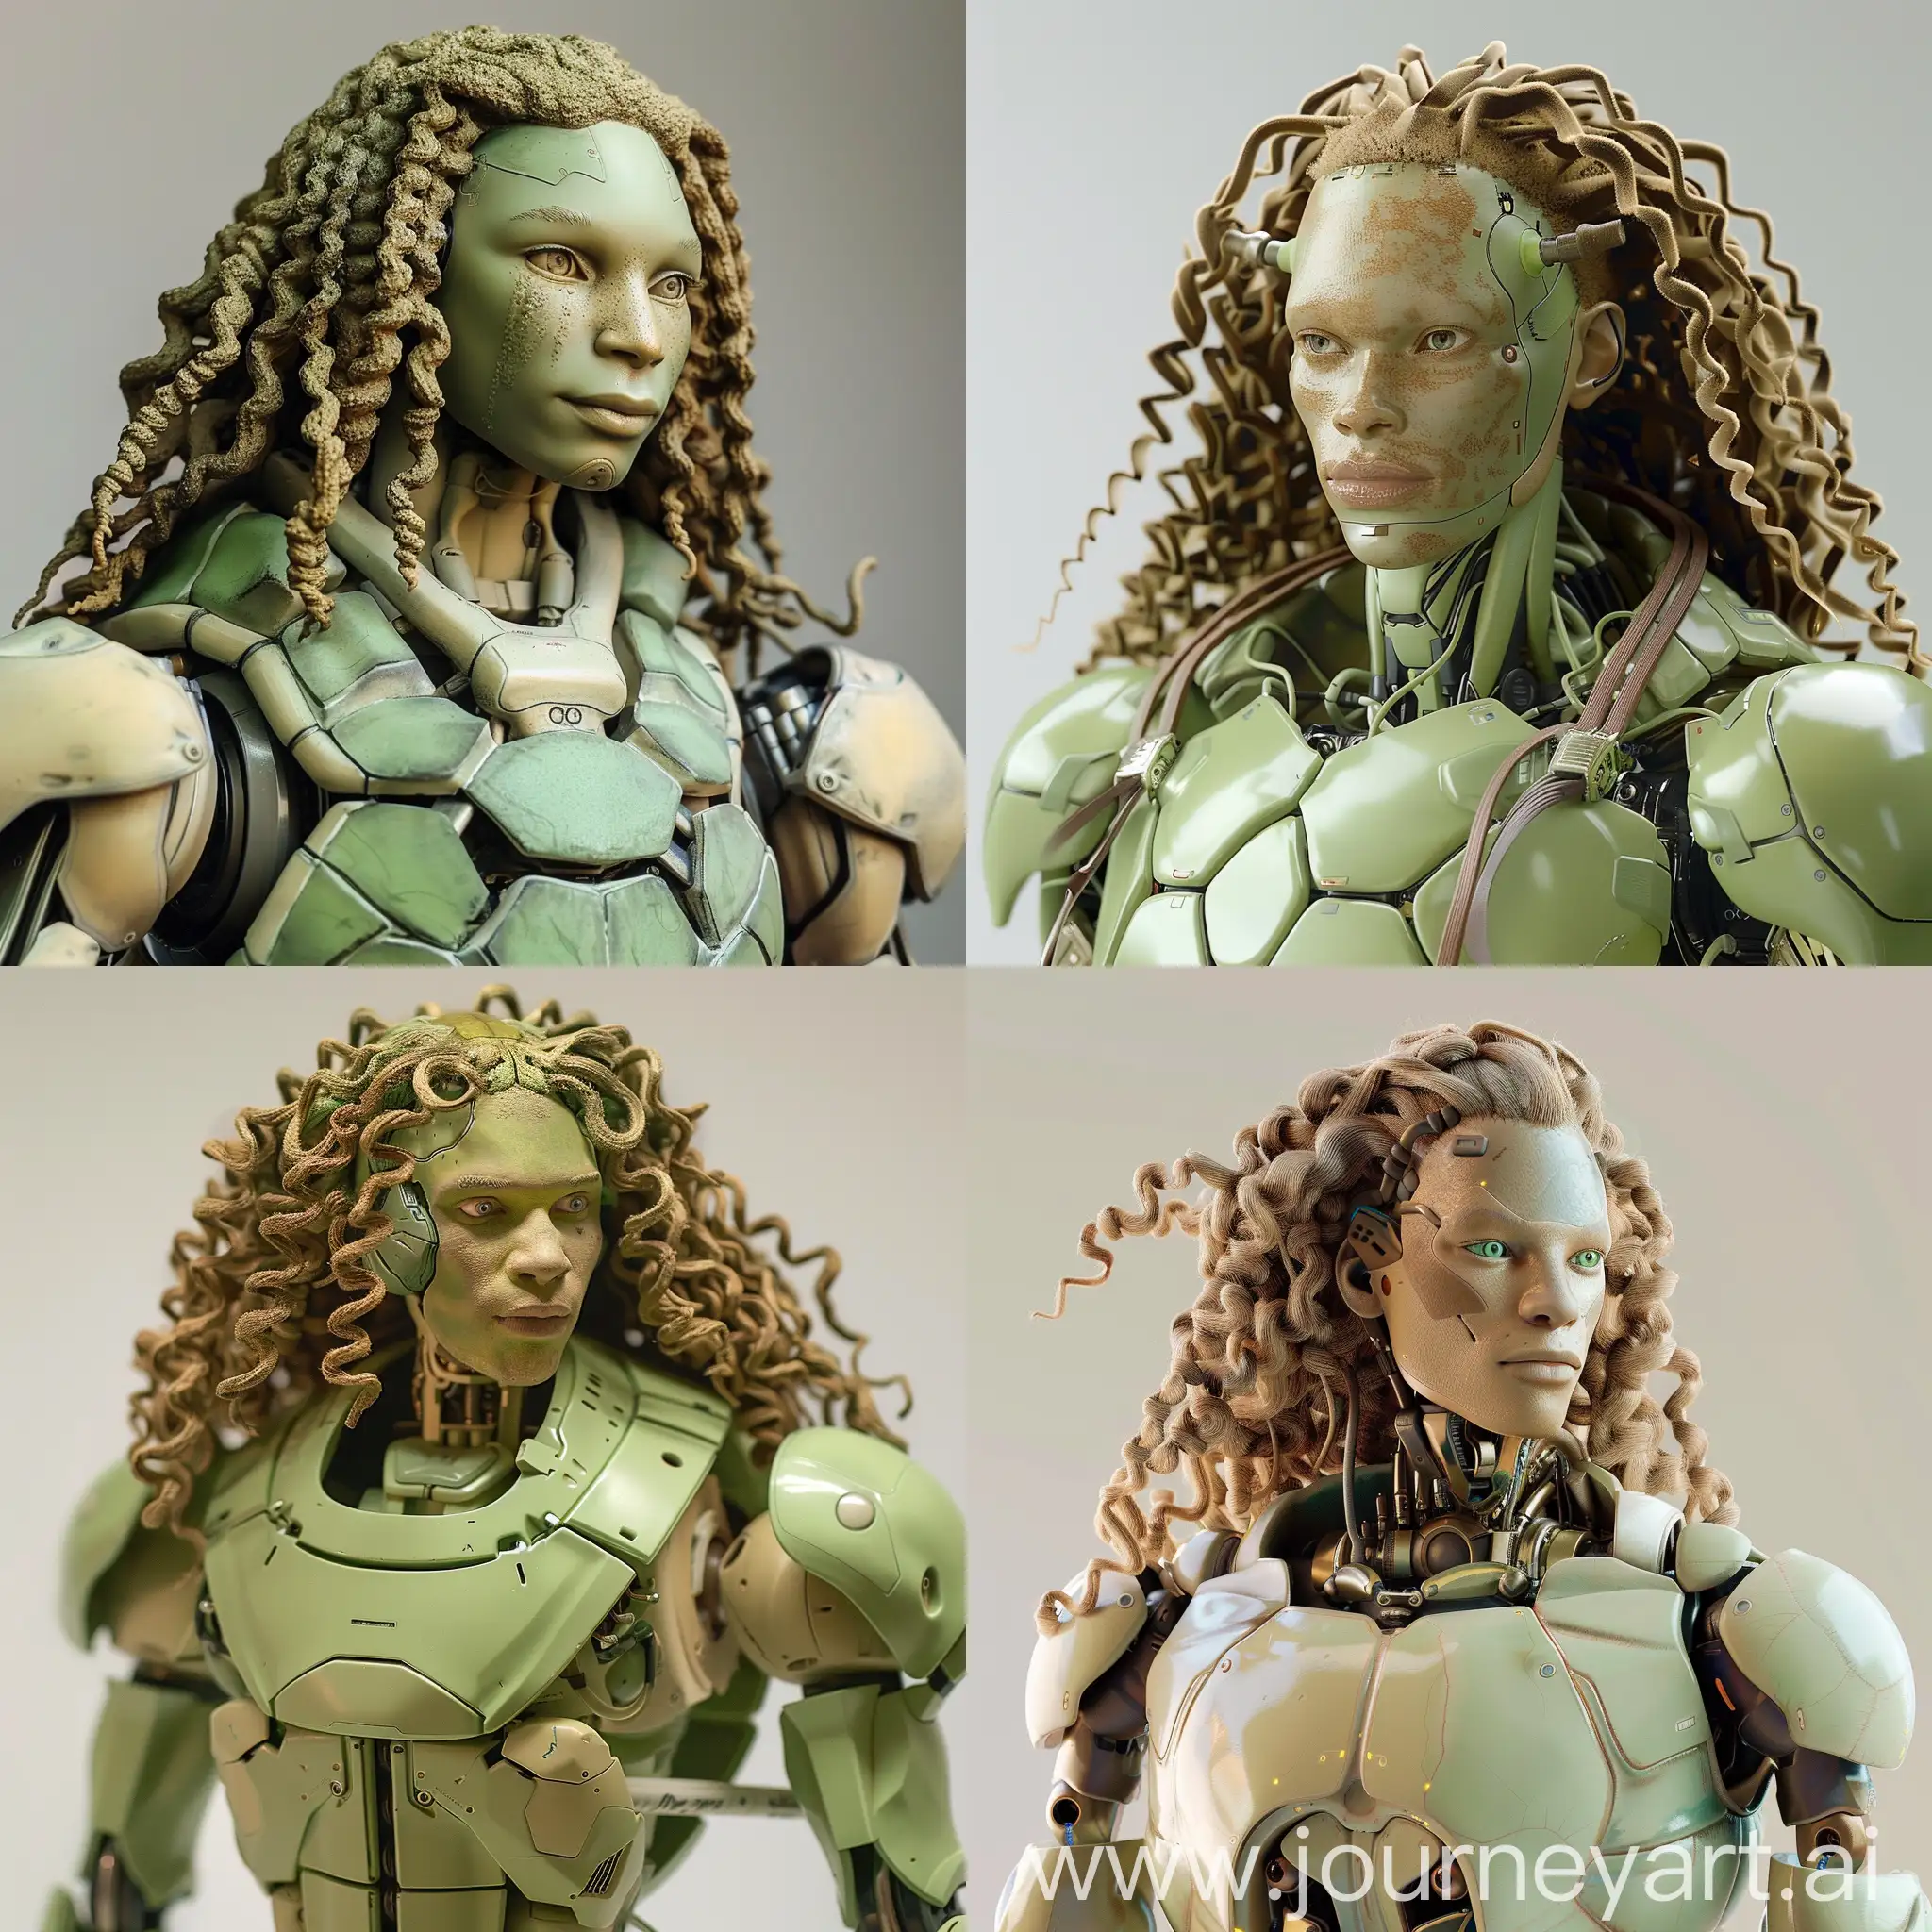 A pale-ish green turtle-themed Human robot. He has light brown skin, and long, volumous curly hair in ringlets